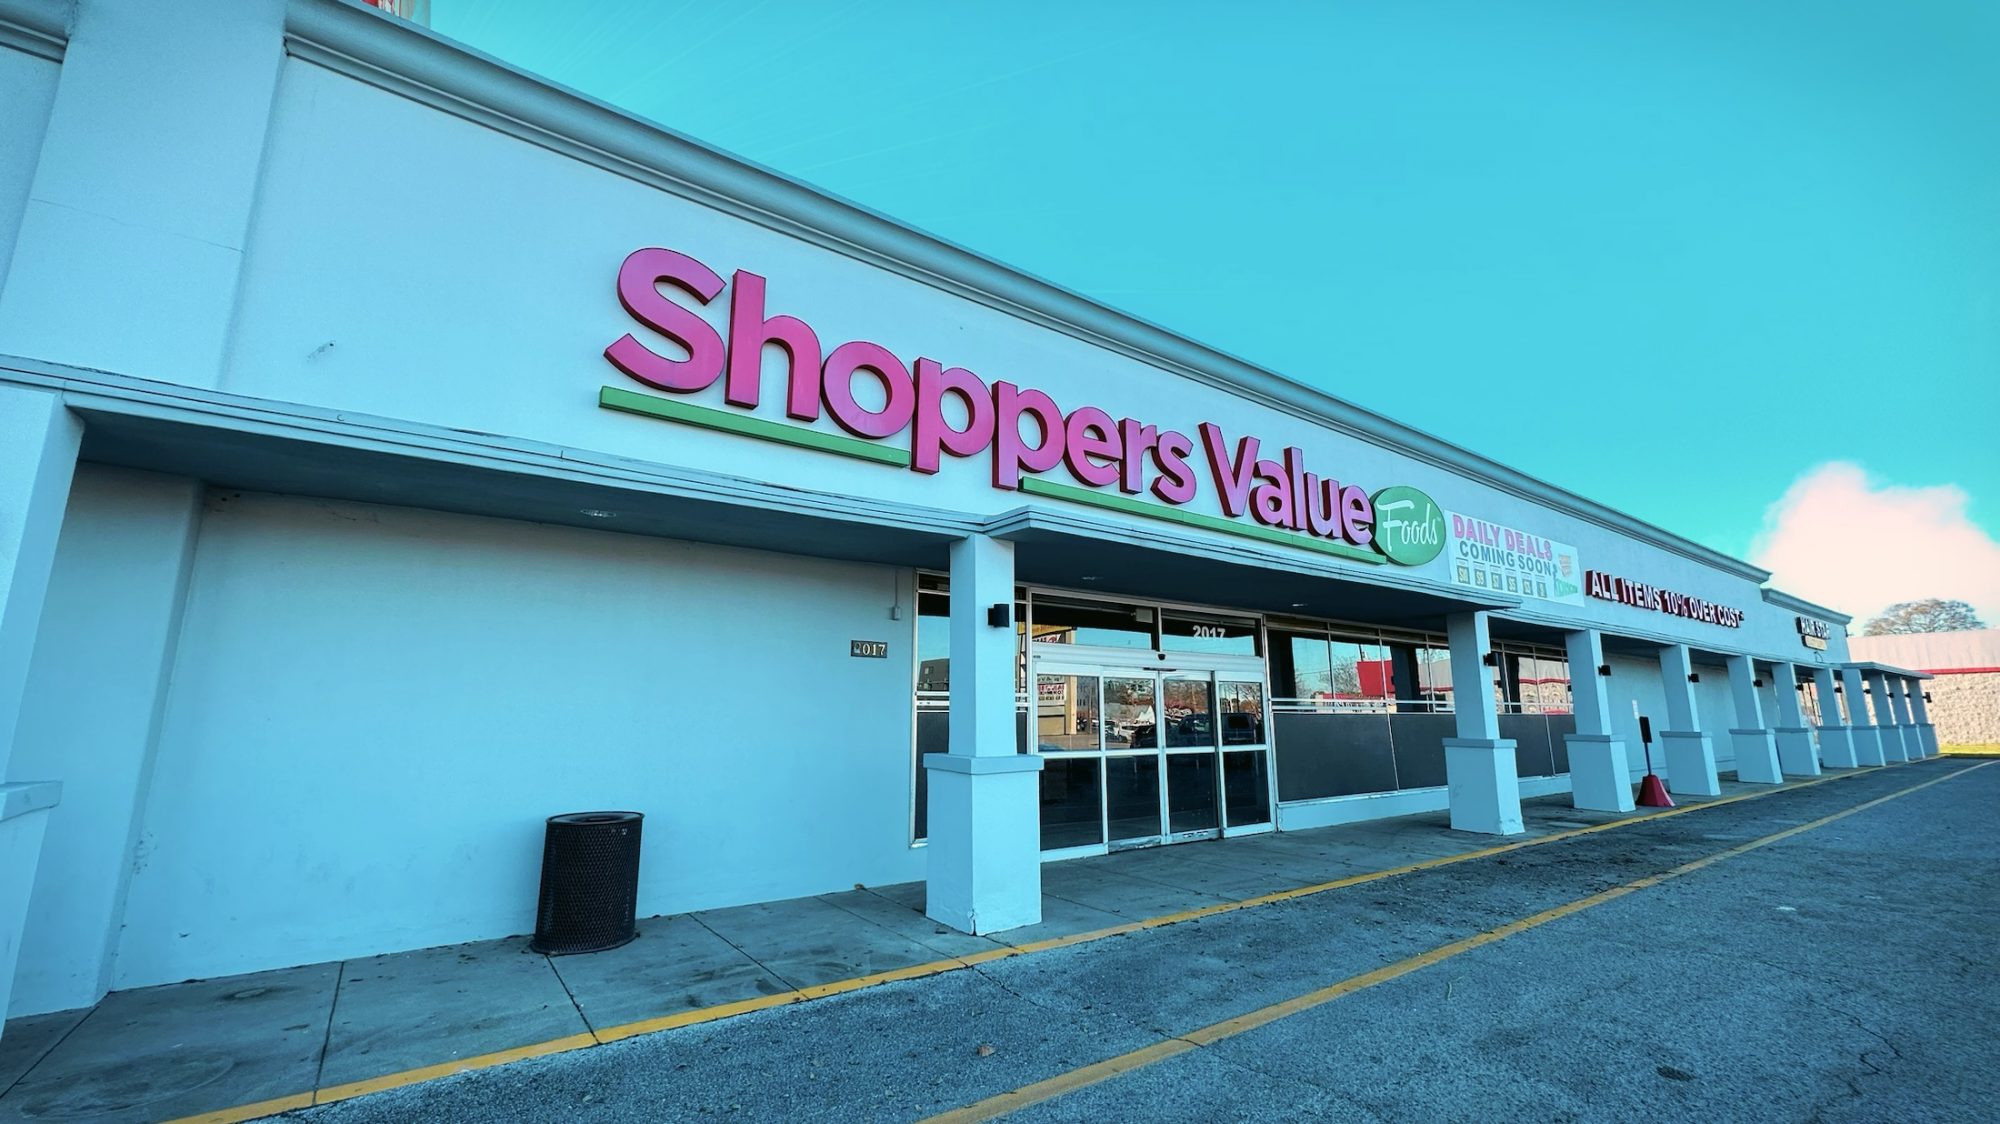 Daily Deals, A New Discount Bin Store Is Taking The Former Shoppers Value  On University Avenue – Developing Lafayette